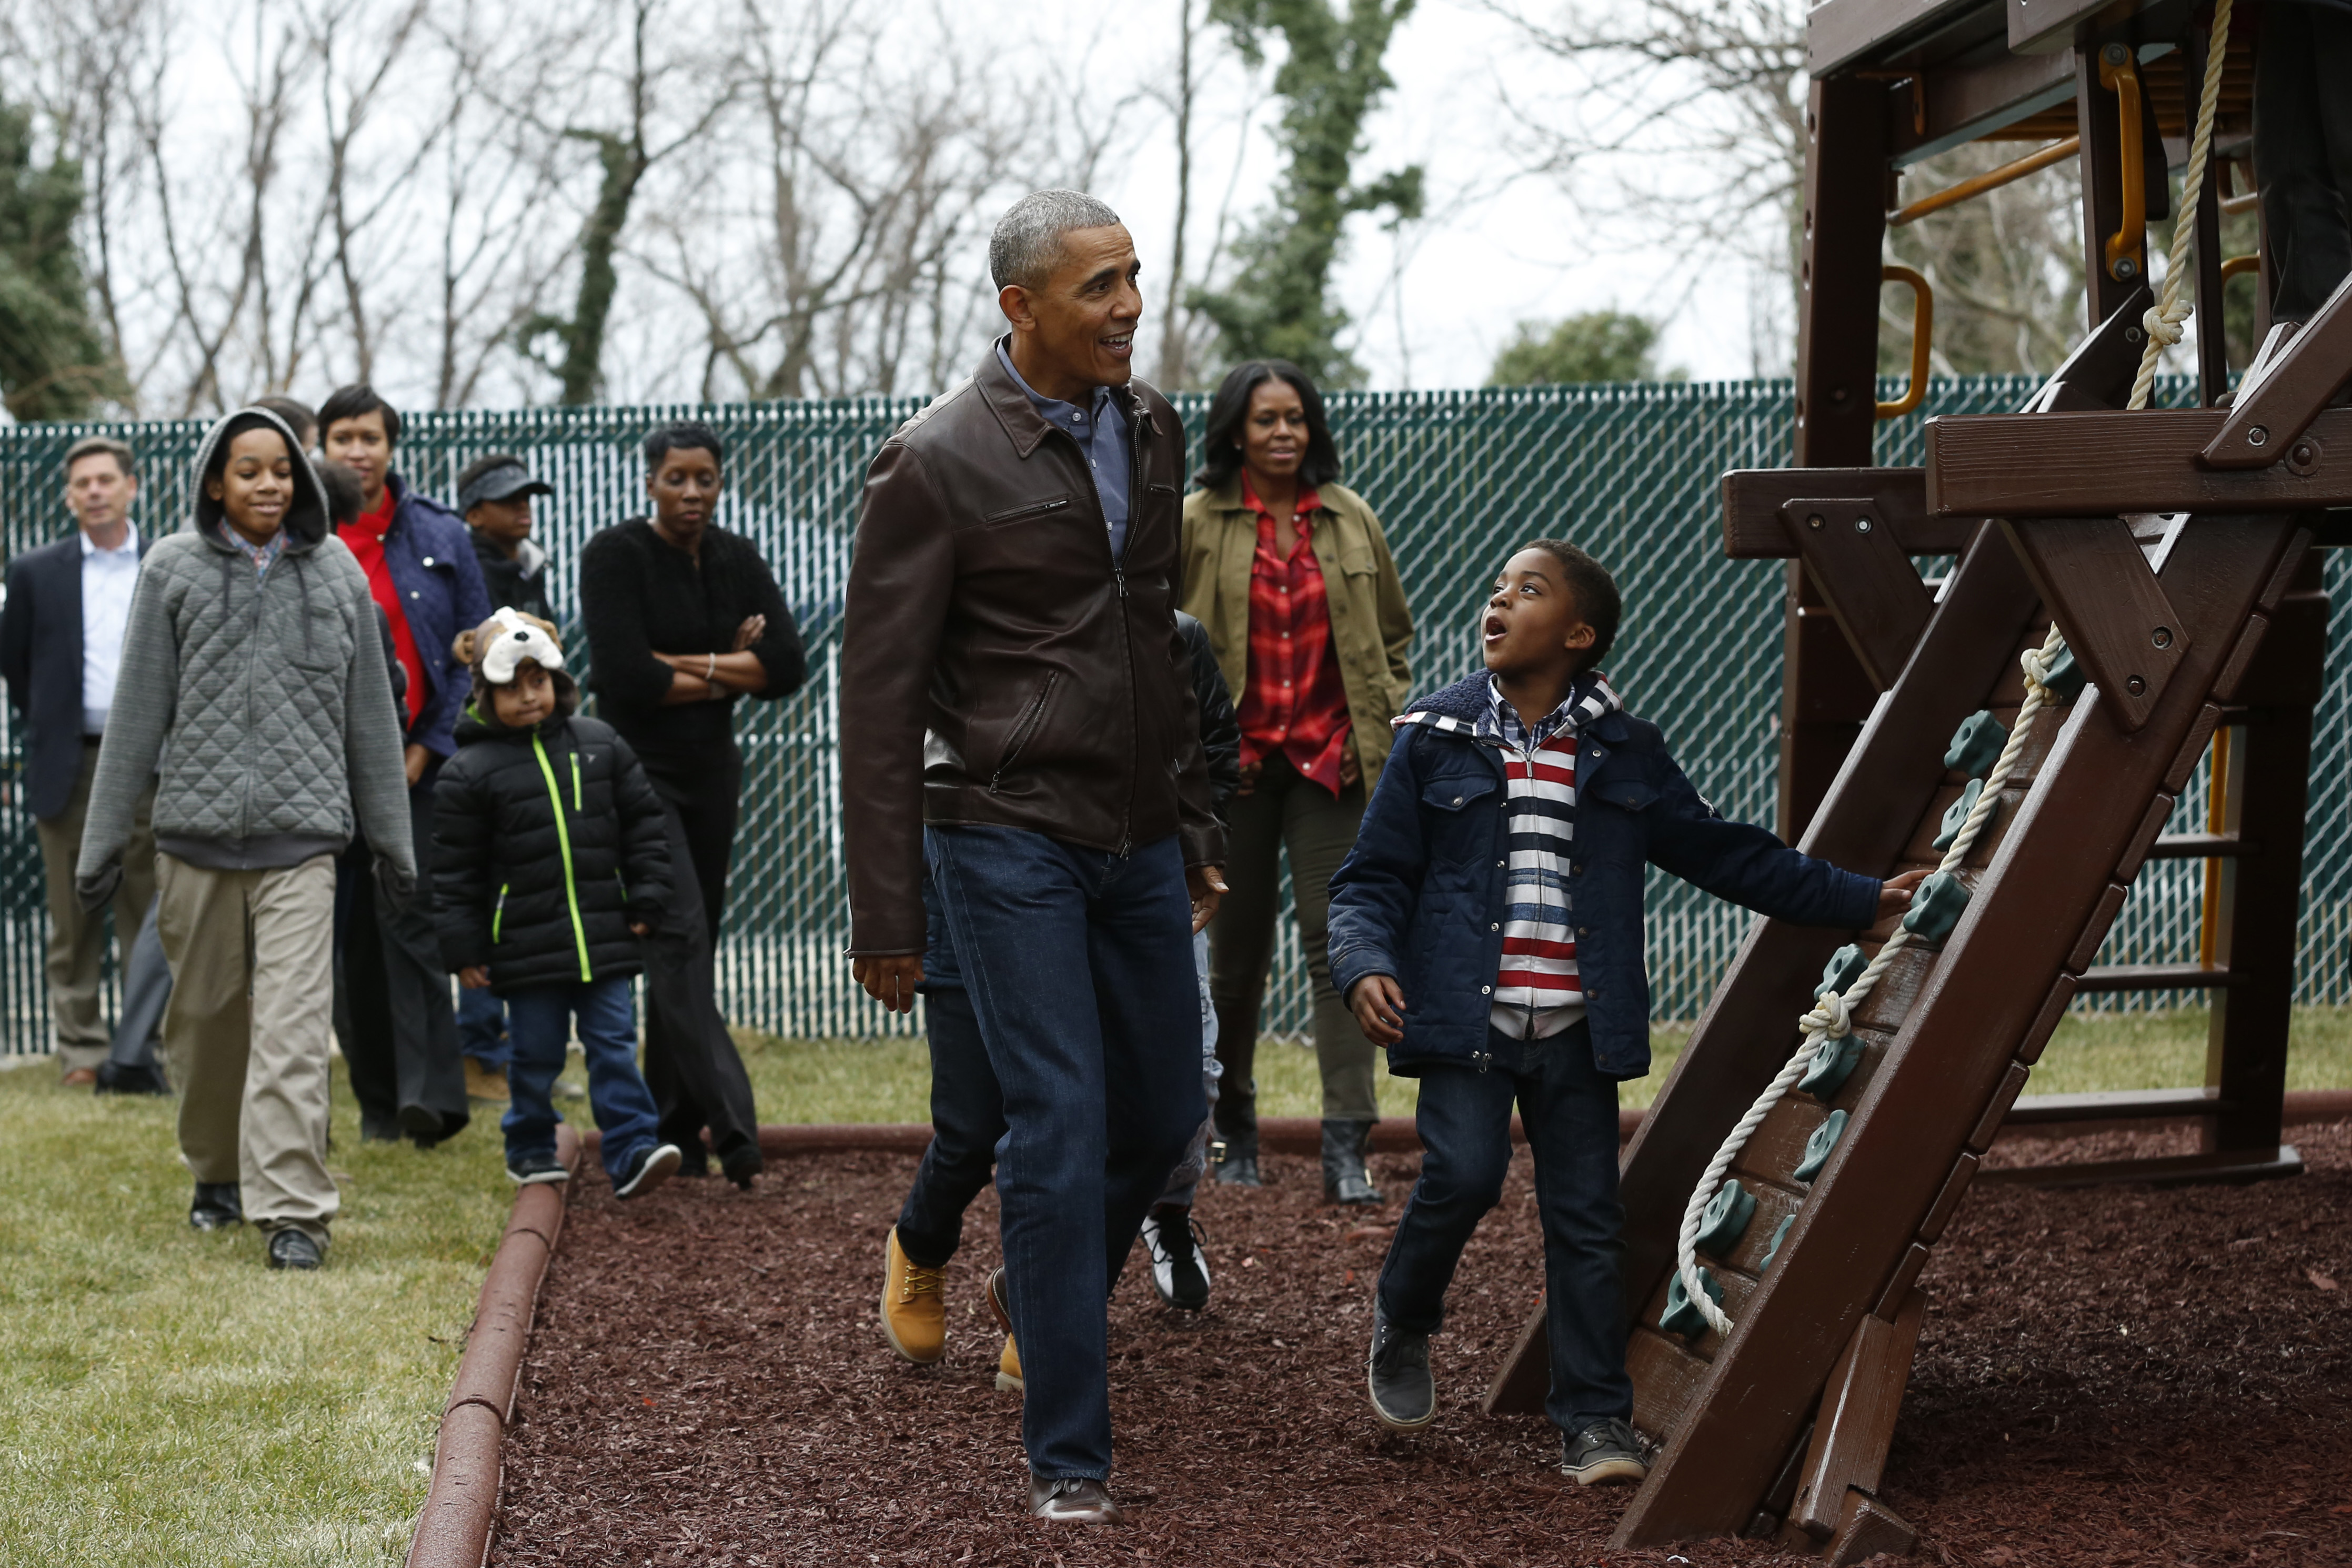 US President Barack Obama and First Lady Michelle Obama play with children on a swing donated by the first family at the Jobs Have Priority Shelter in Washington, DC on January 16, 2017. / AFP / YURI GRIPAS (Photo credit should read YURI GRIPAS/AFP/Getty Images) (YURI GRIPAS—AFP/Getty Images)